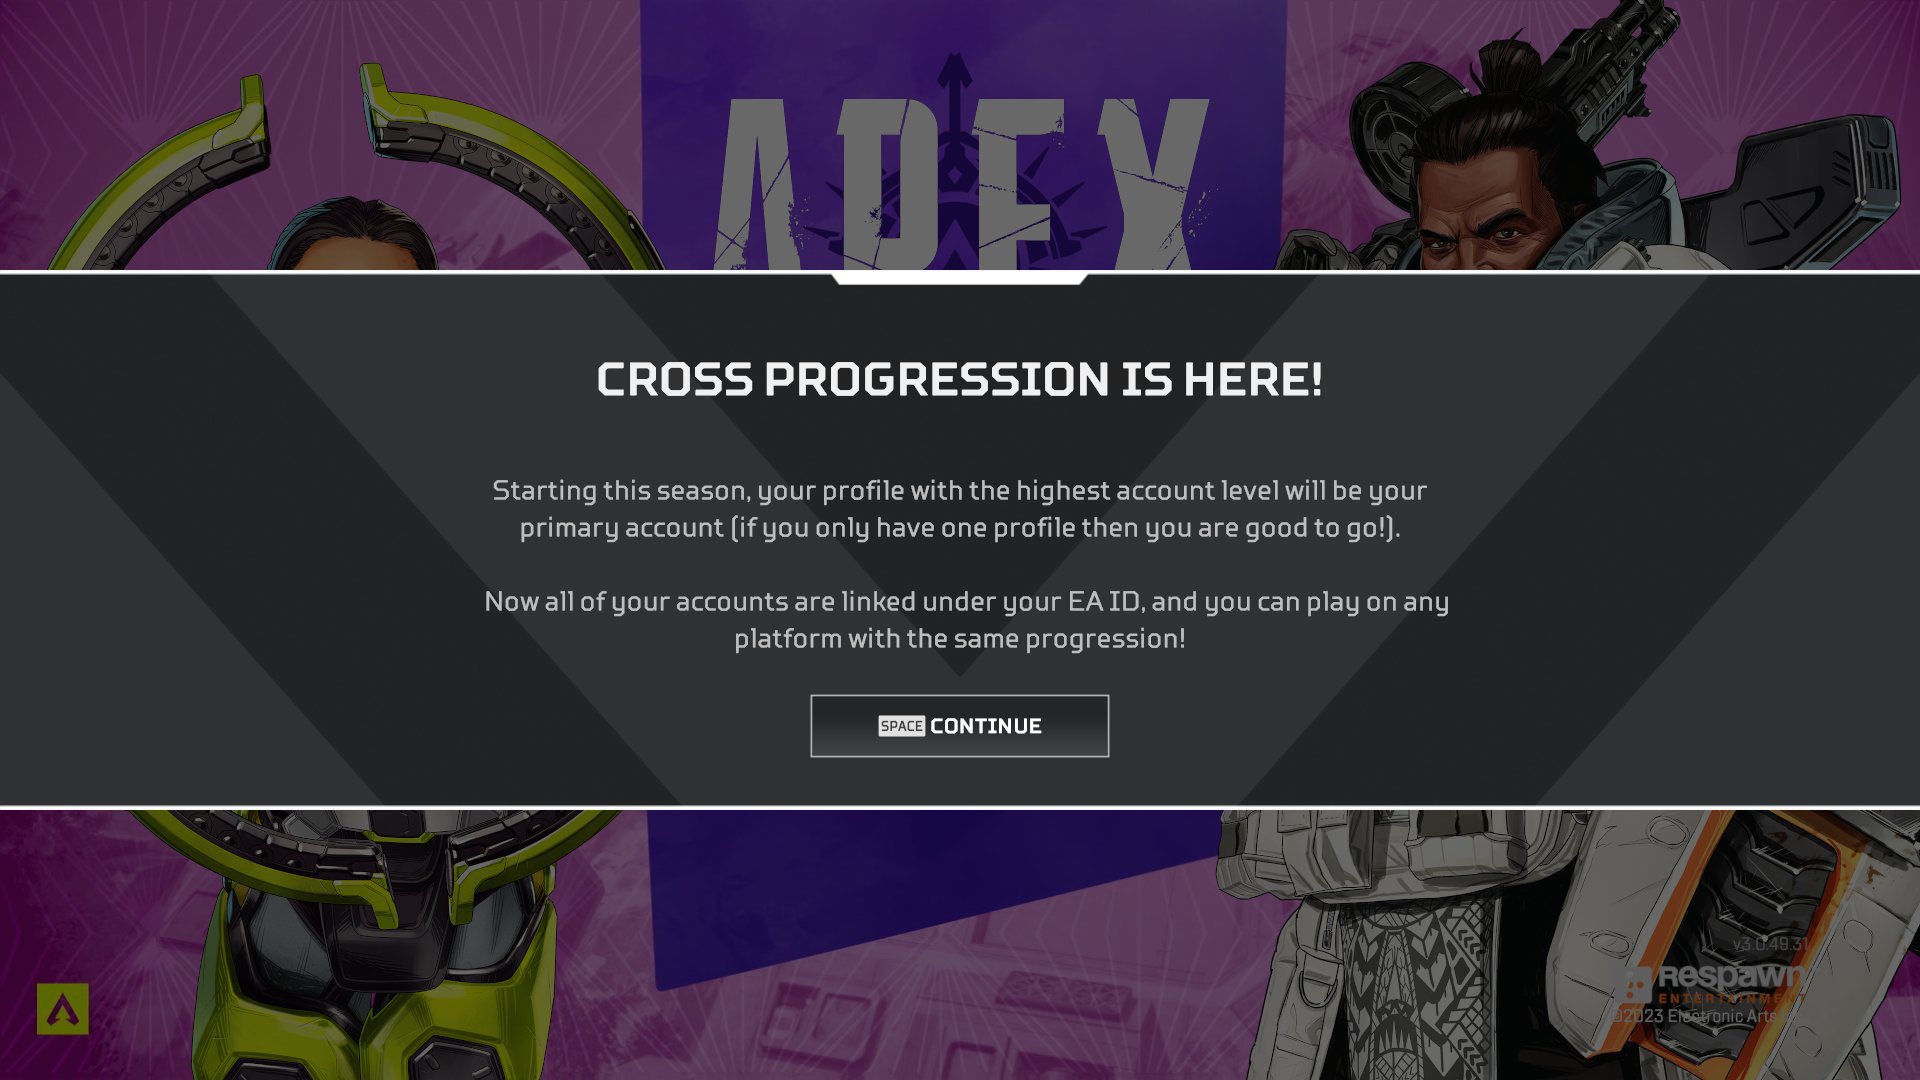 Interesting if true, cross progression update : r/ApexUncovered